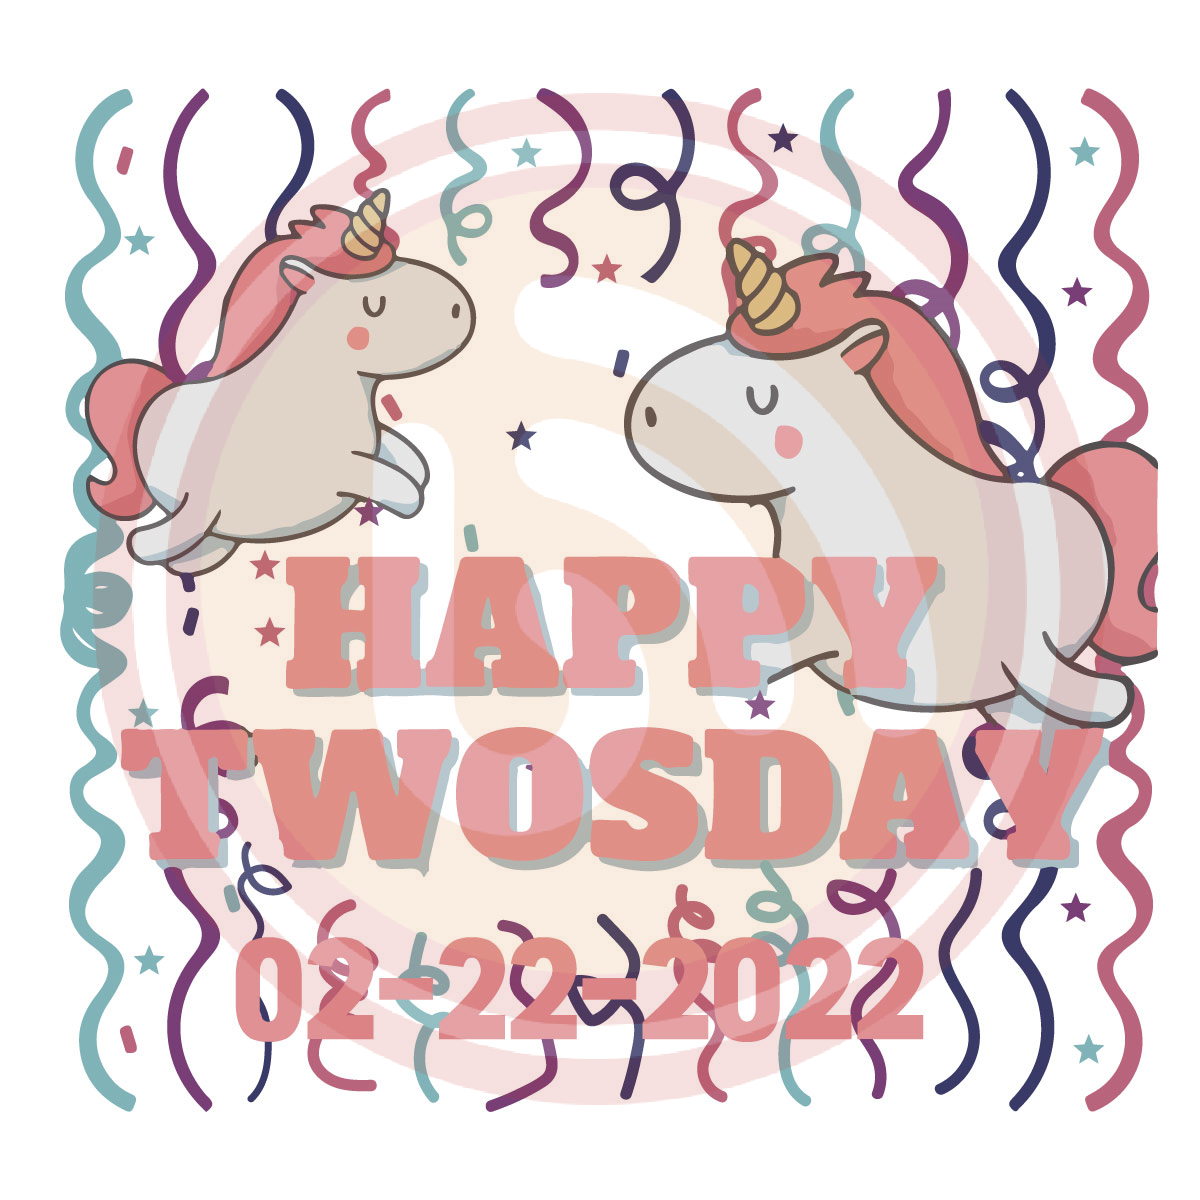 happy-twos-day-unicorn-tuesday-2-22-22-digital-download-file